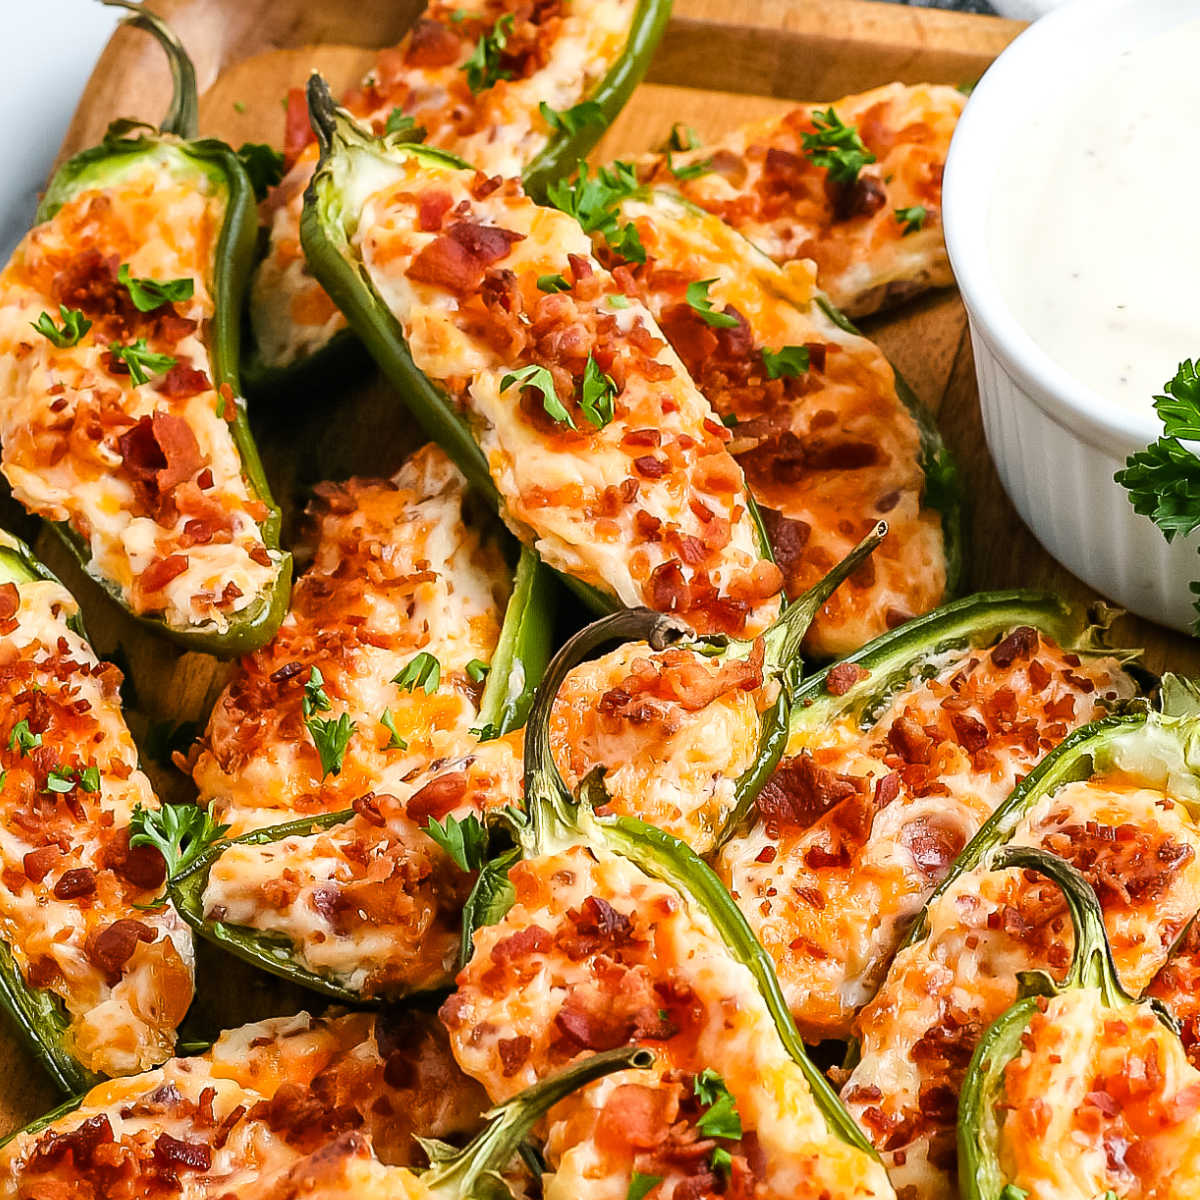 https://foodfolksandfun.net/wp-content/uploads/2020/12/Baked-Cream-Cheese-Jalapeno-Poppers.jpg